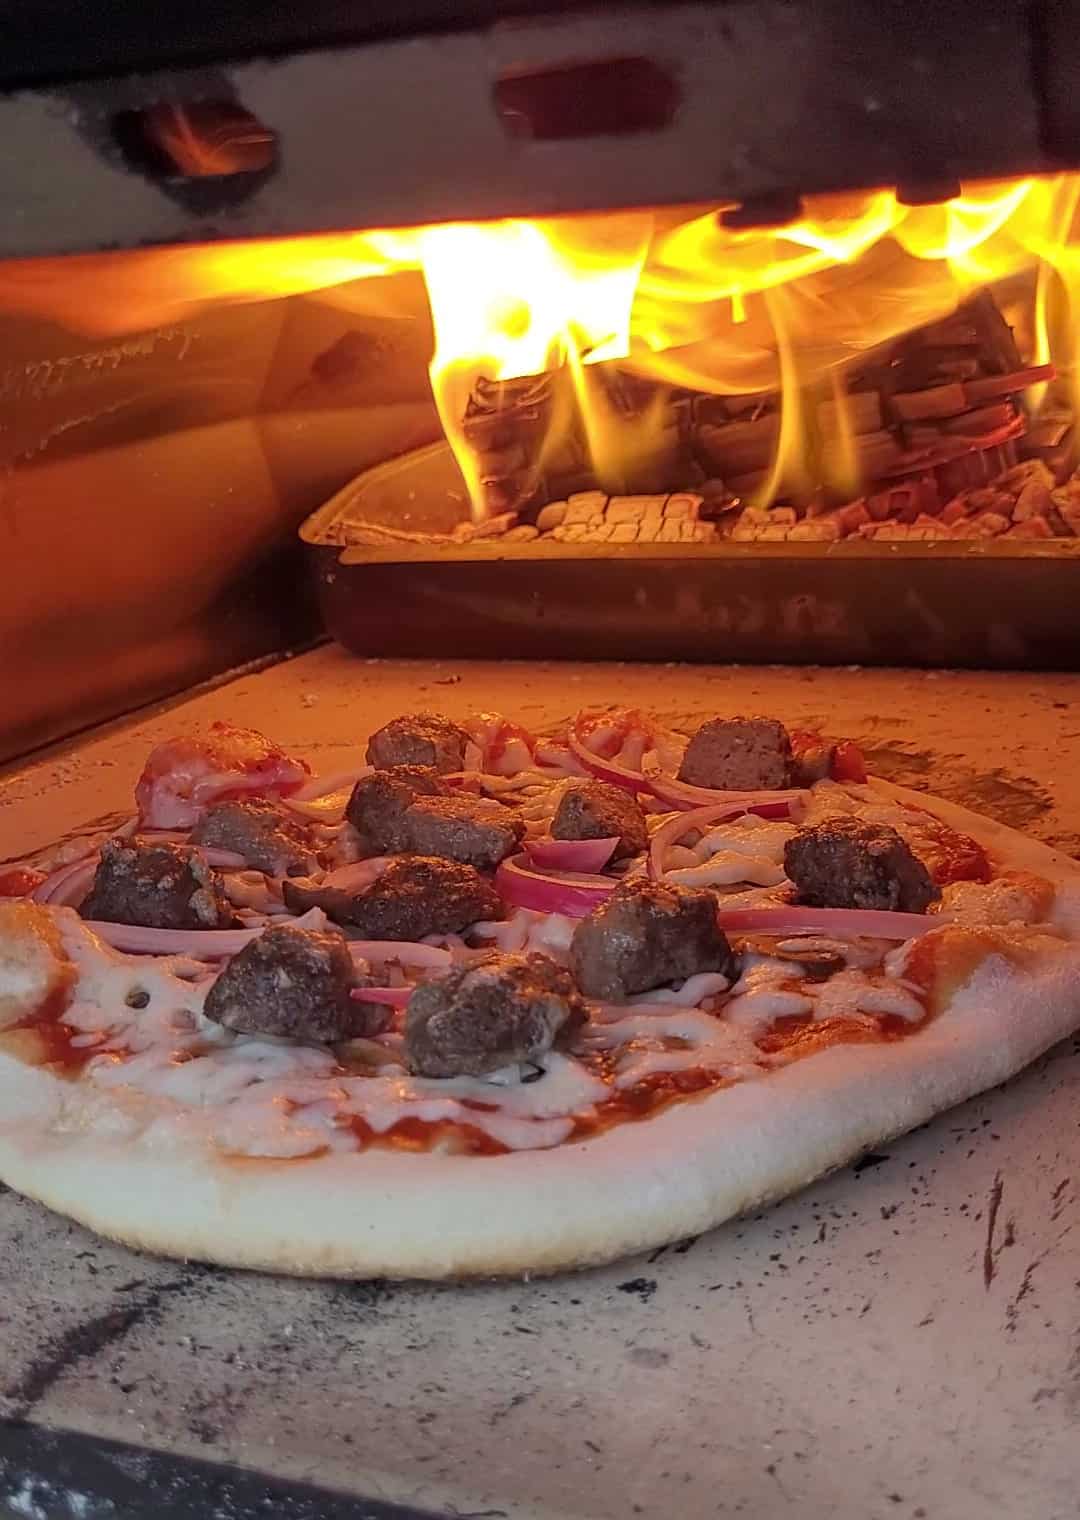 A meatball pizza cooking inside a Ooni pizza oven lit with a wood fire.